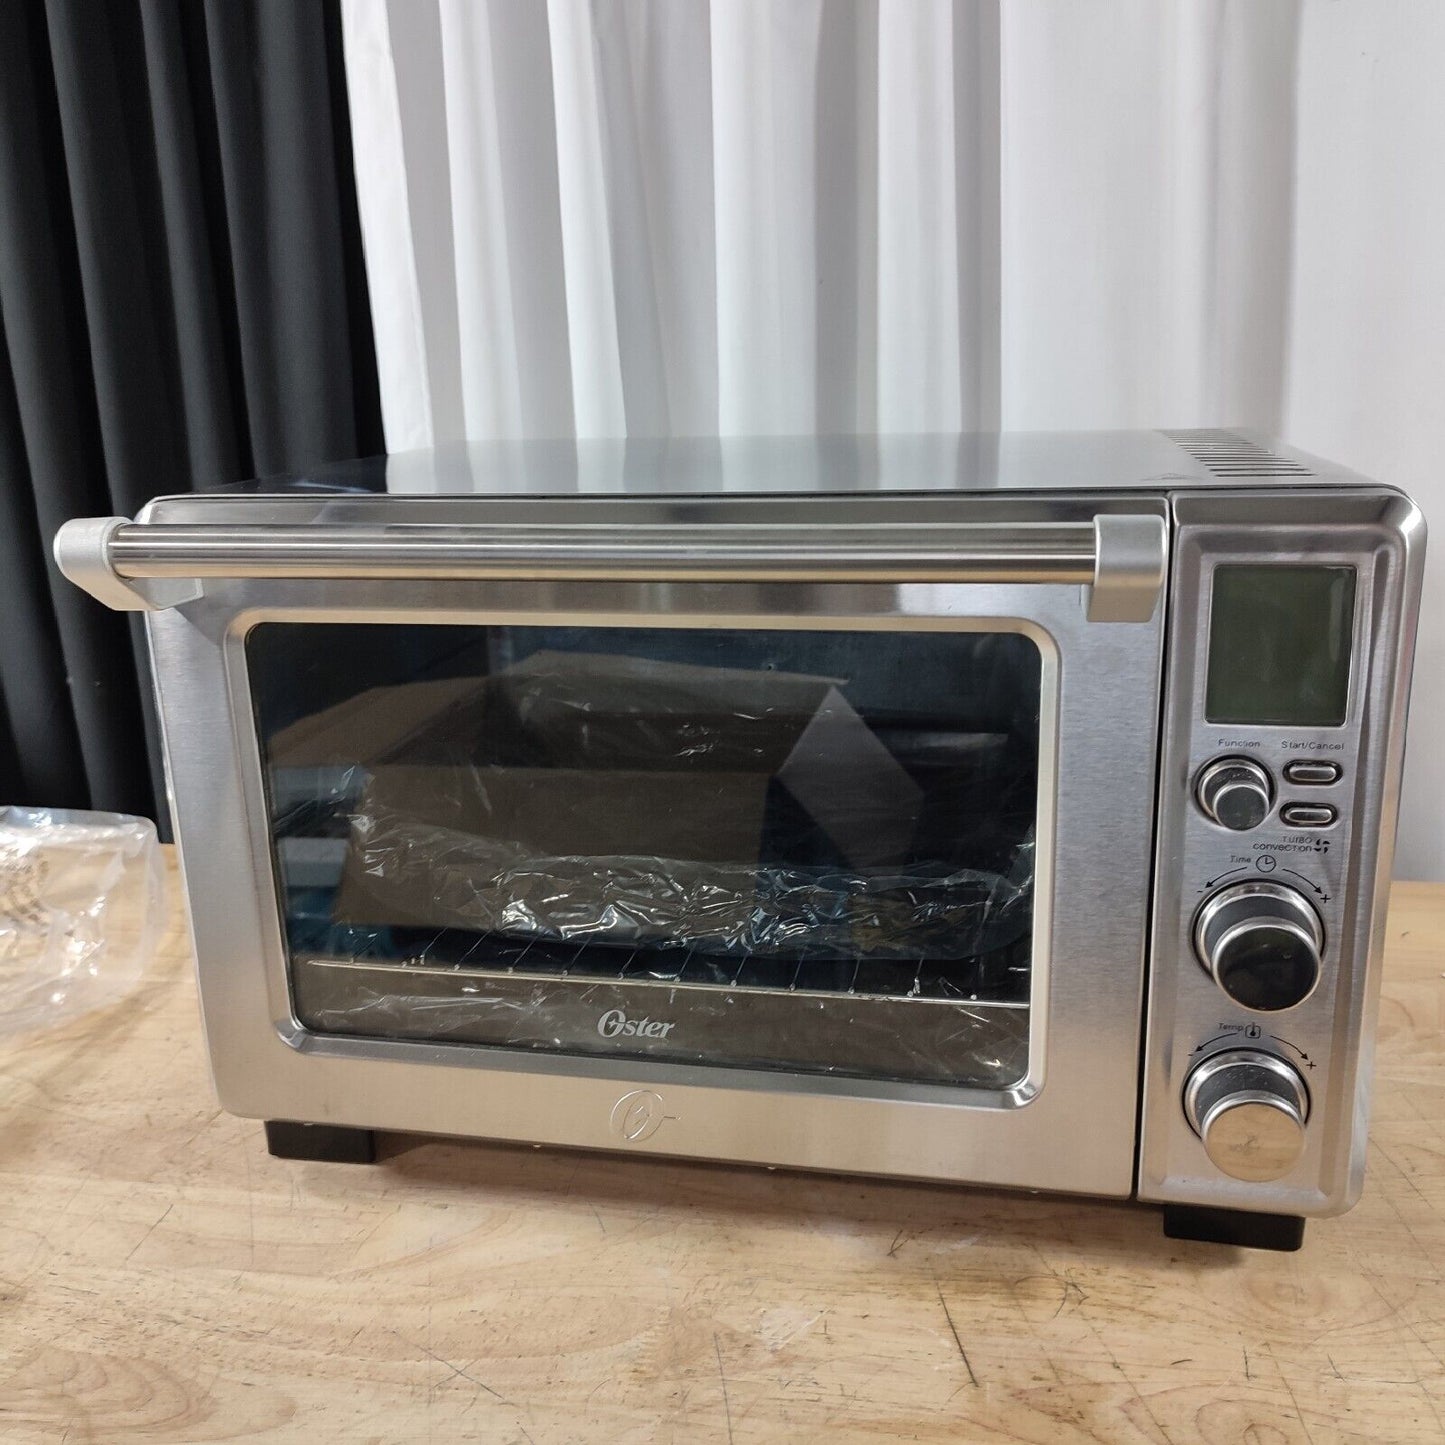 Oster Digital Stainless Steel Countertop Turbo Convection Oven TSSTTVDFL1GP